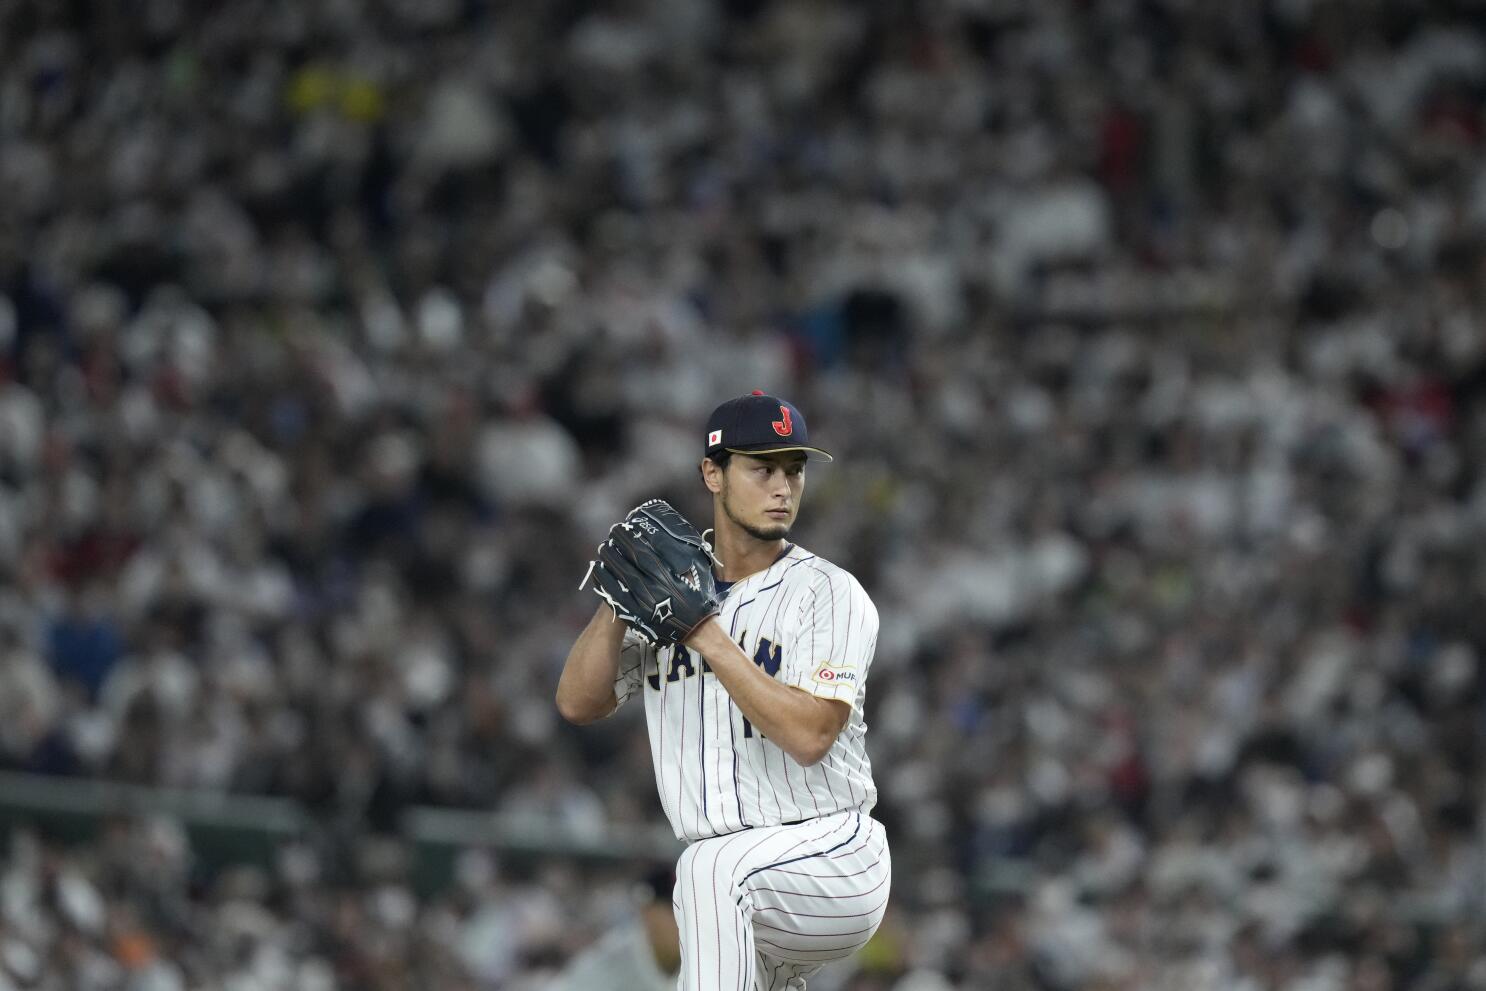 Padres notes: Yu Darvish to be assessed as WBC ends; Joe Musgrove still  aims for April 6; Drew Pomeranz down - The San Diego Union-Tribune